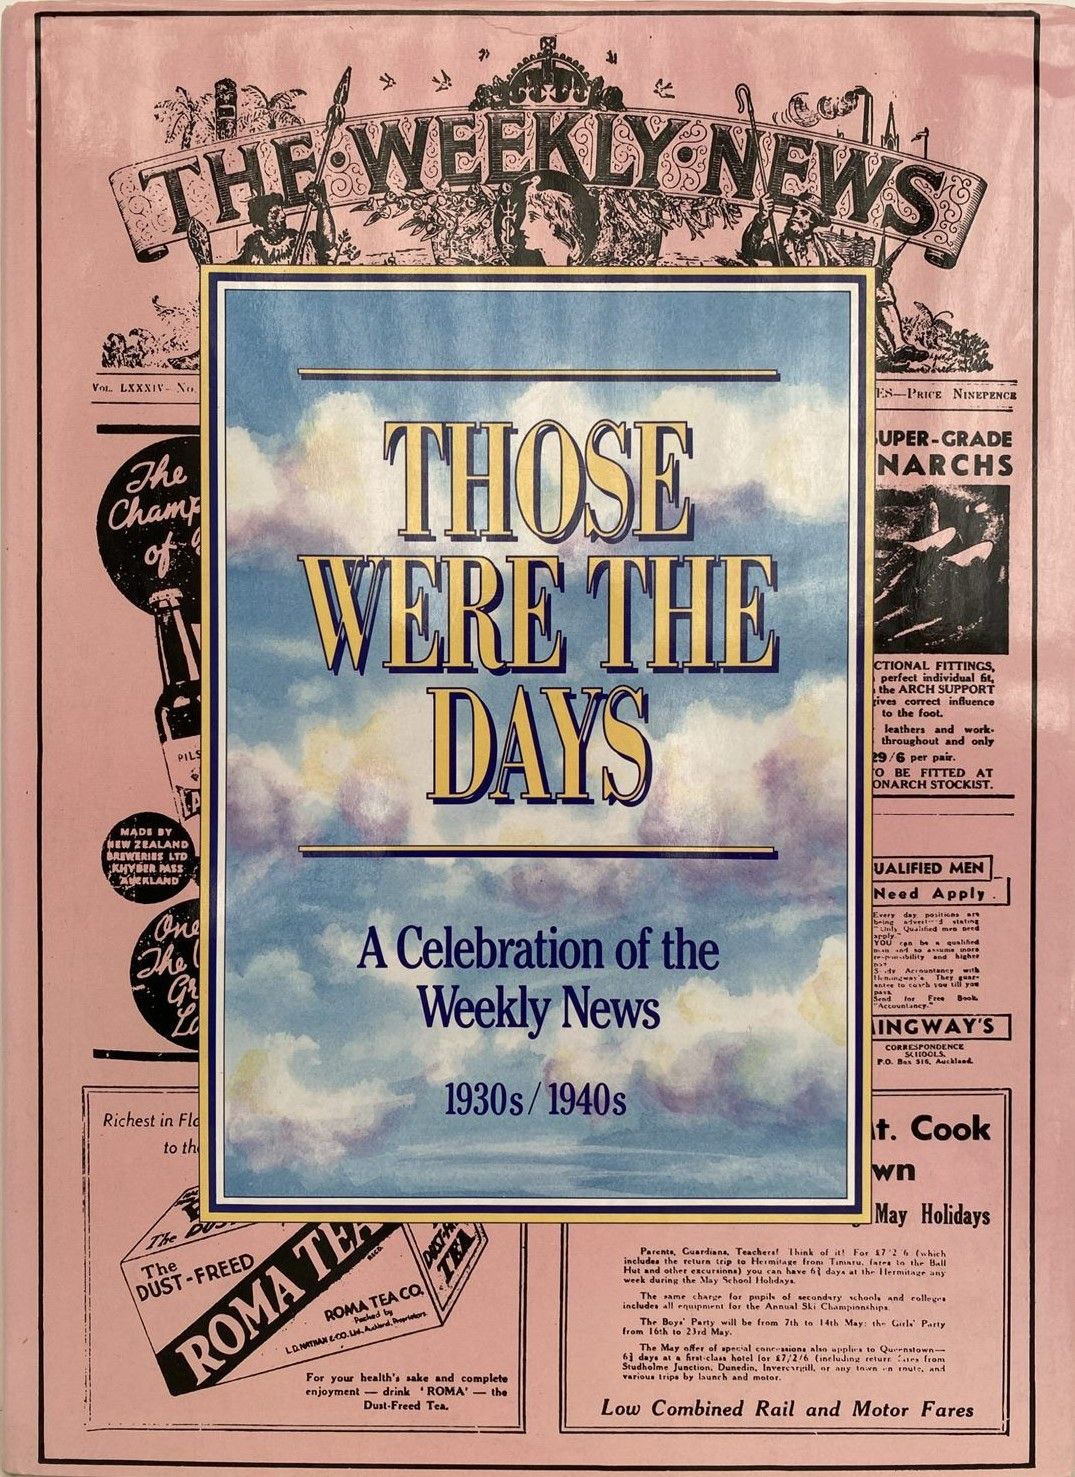 THOSE WERE THE DAYS: A Celebration of the Weekly News 1930s / 1940s